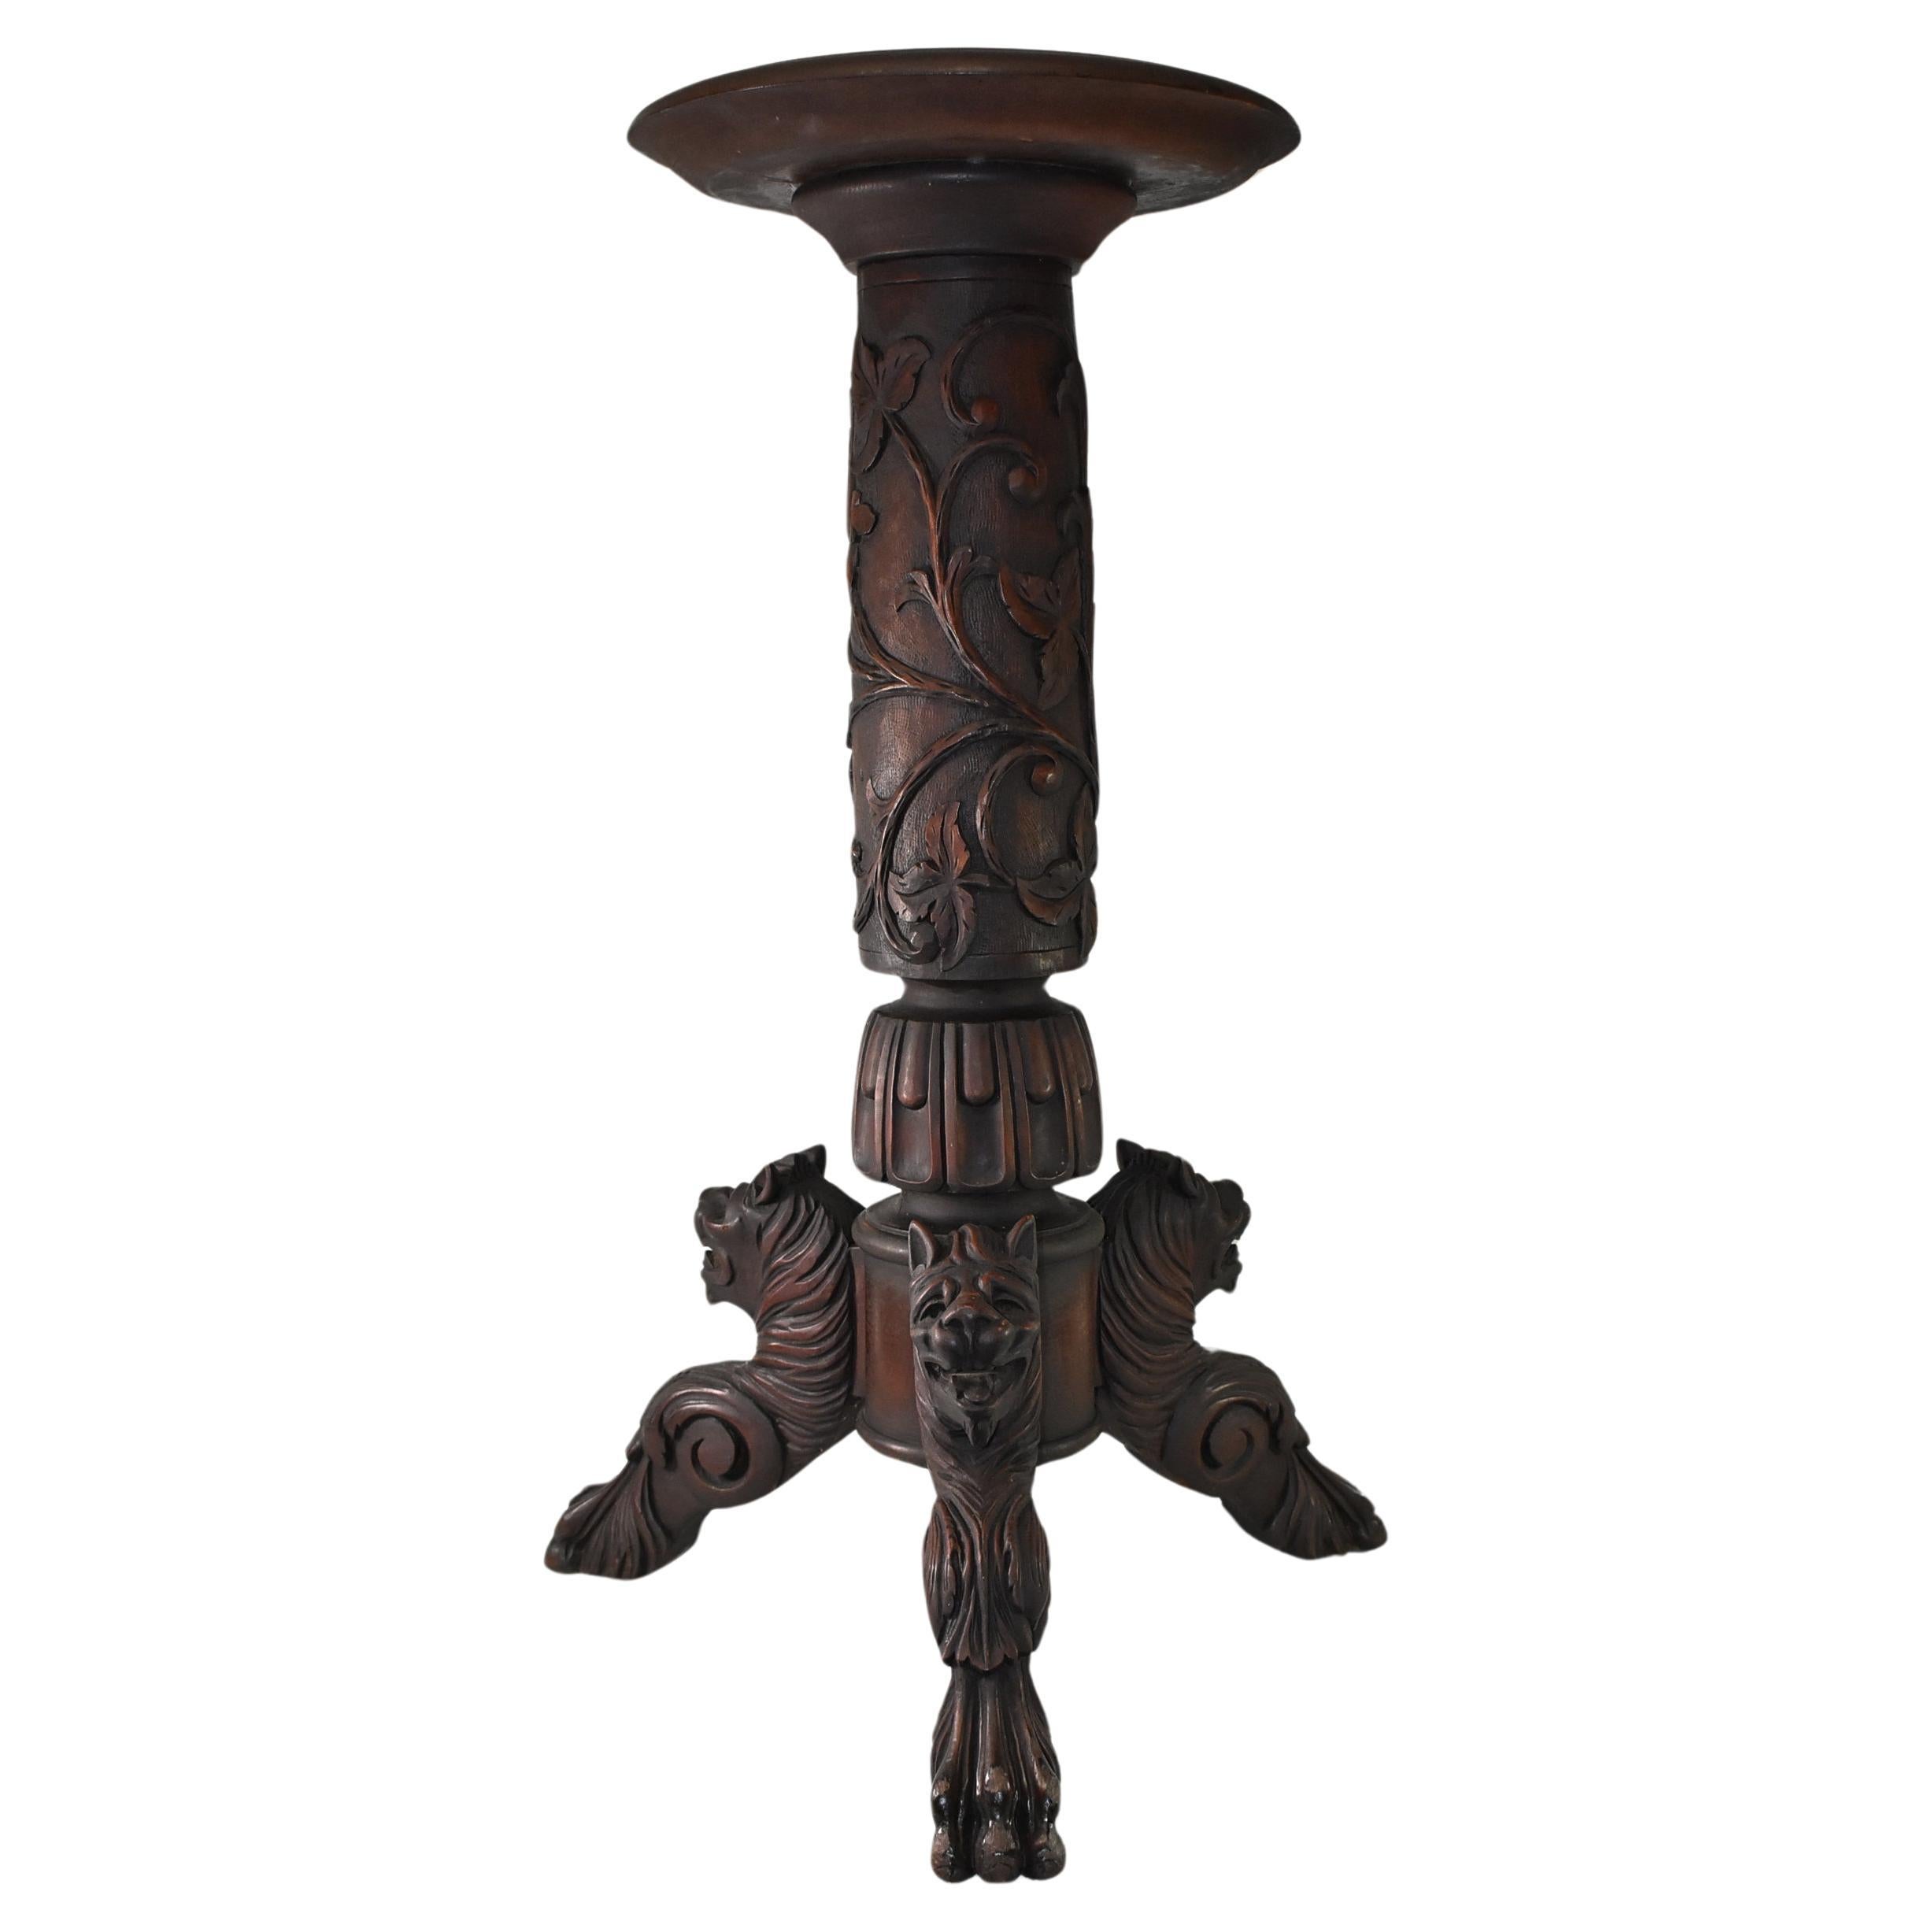 Victorian mahogany plant stand with carved lion heads and claw feet. Three supporting legs center column with carved flowers and vines. Original finish. In the style of R J Horner. 38